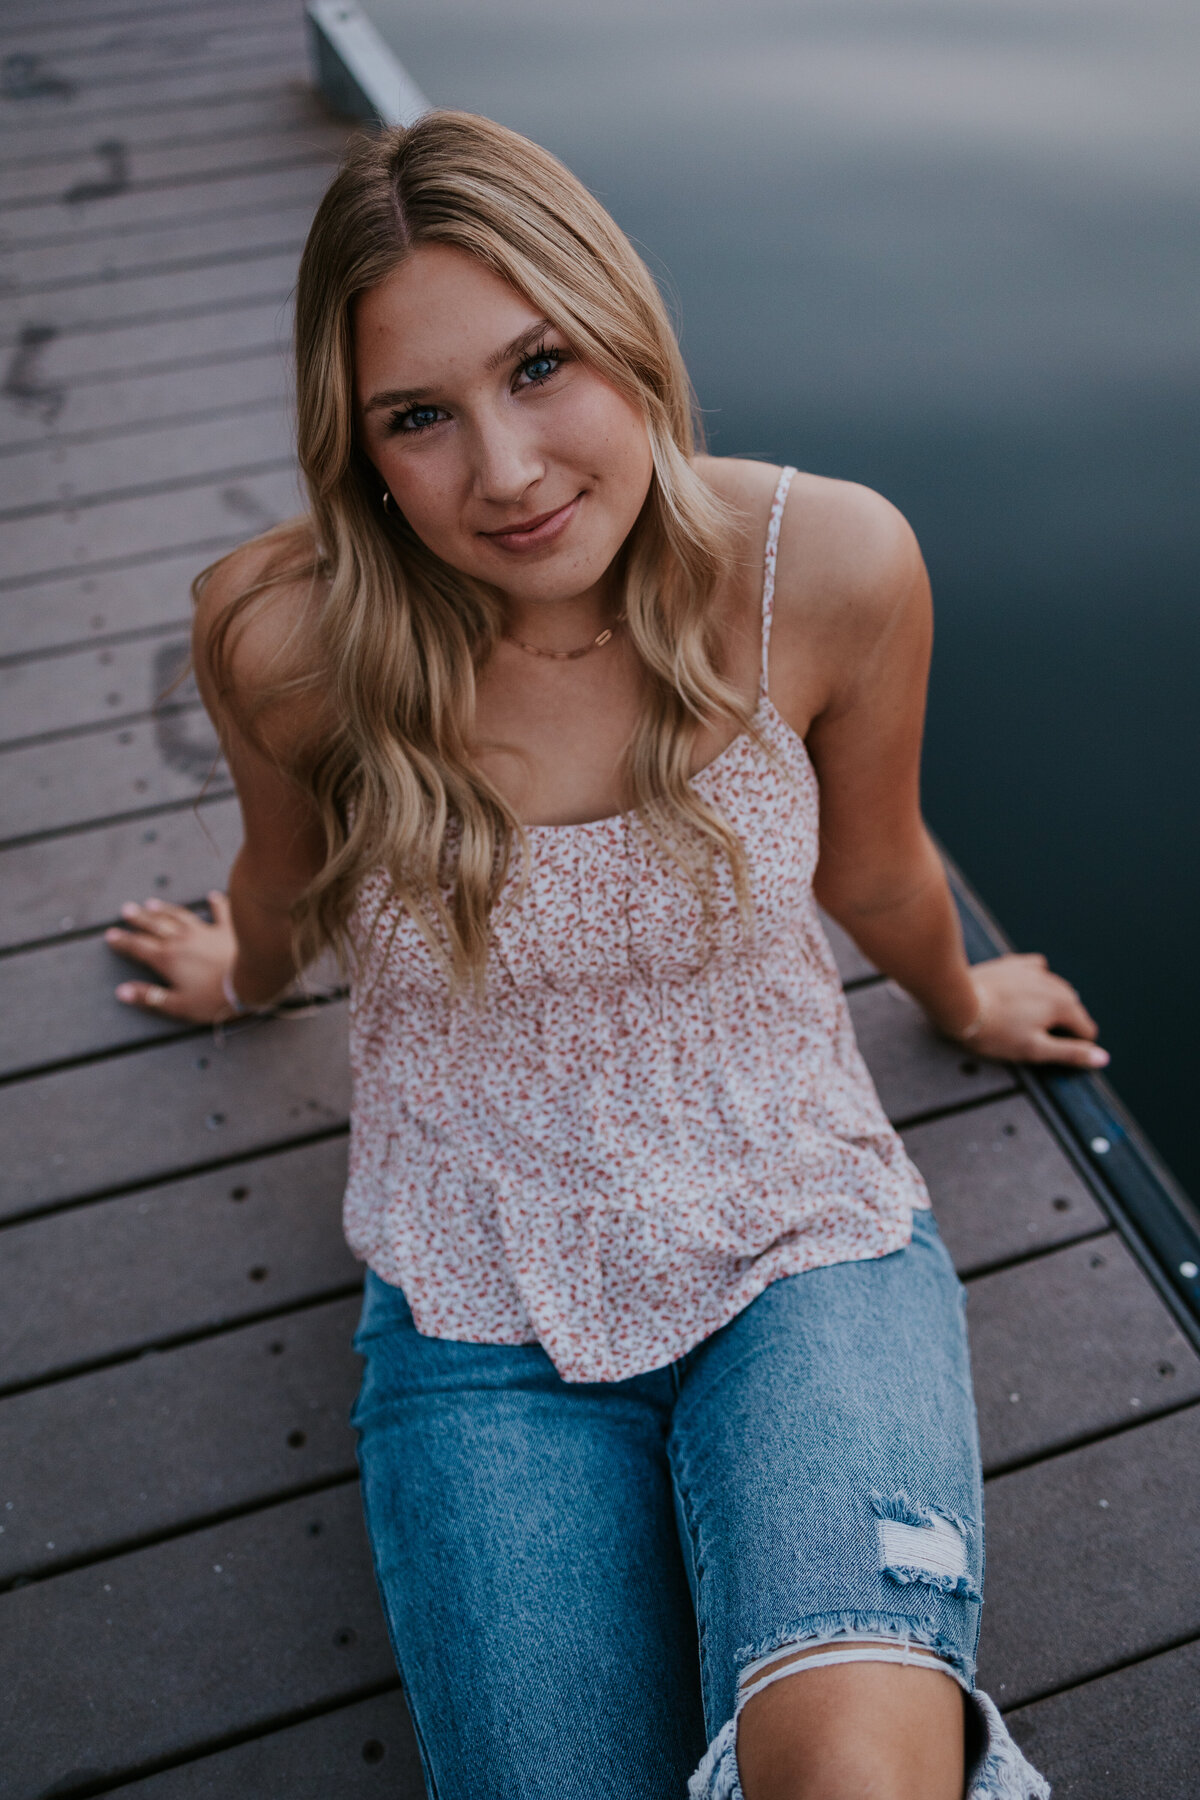 Young woman sits on dock in summer clothes while looking up at camera.